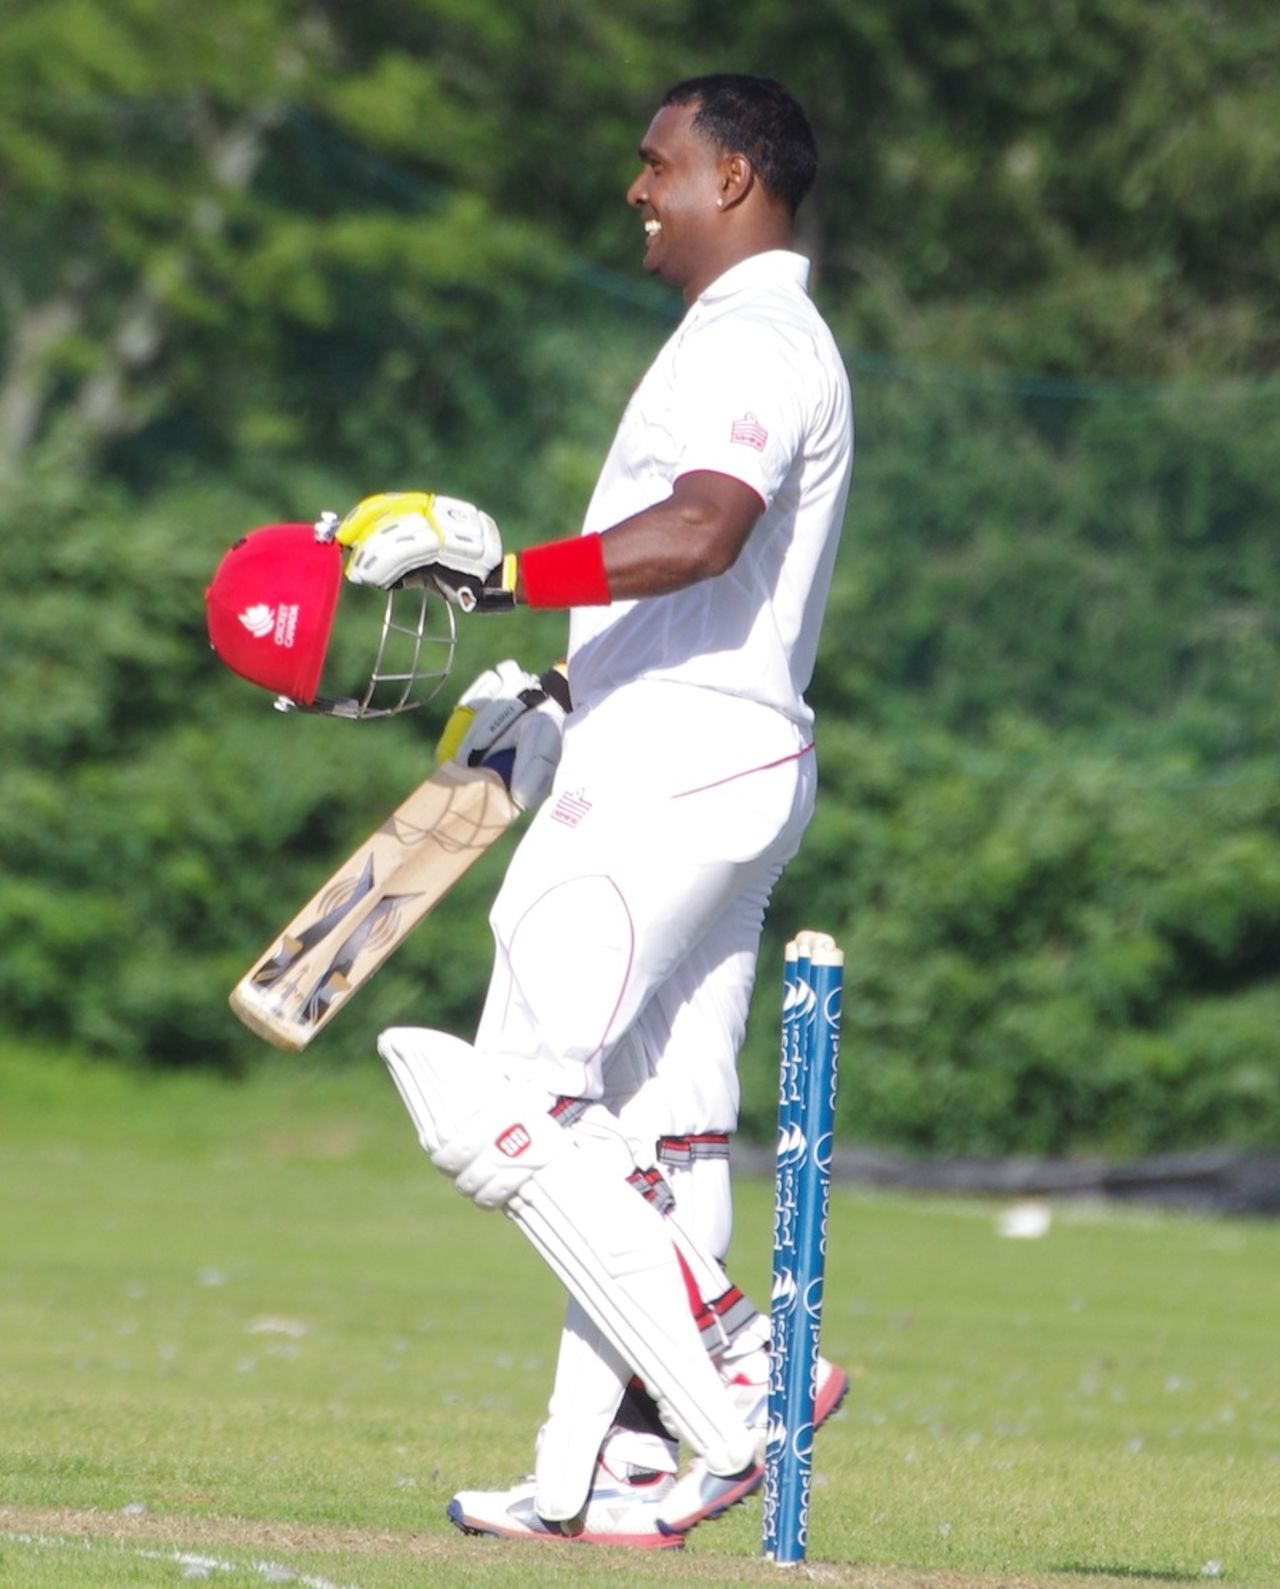 Damodar Daesrath celebrates his hundred, Canada v United Arab Emirates, ICC Intercontinental Cup, 3rd day, King City, August 3, 2013